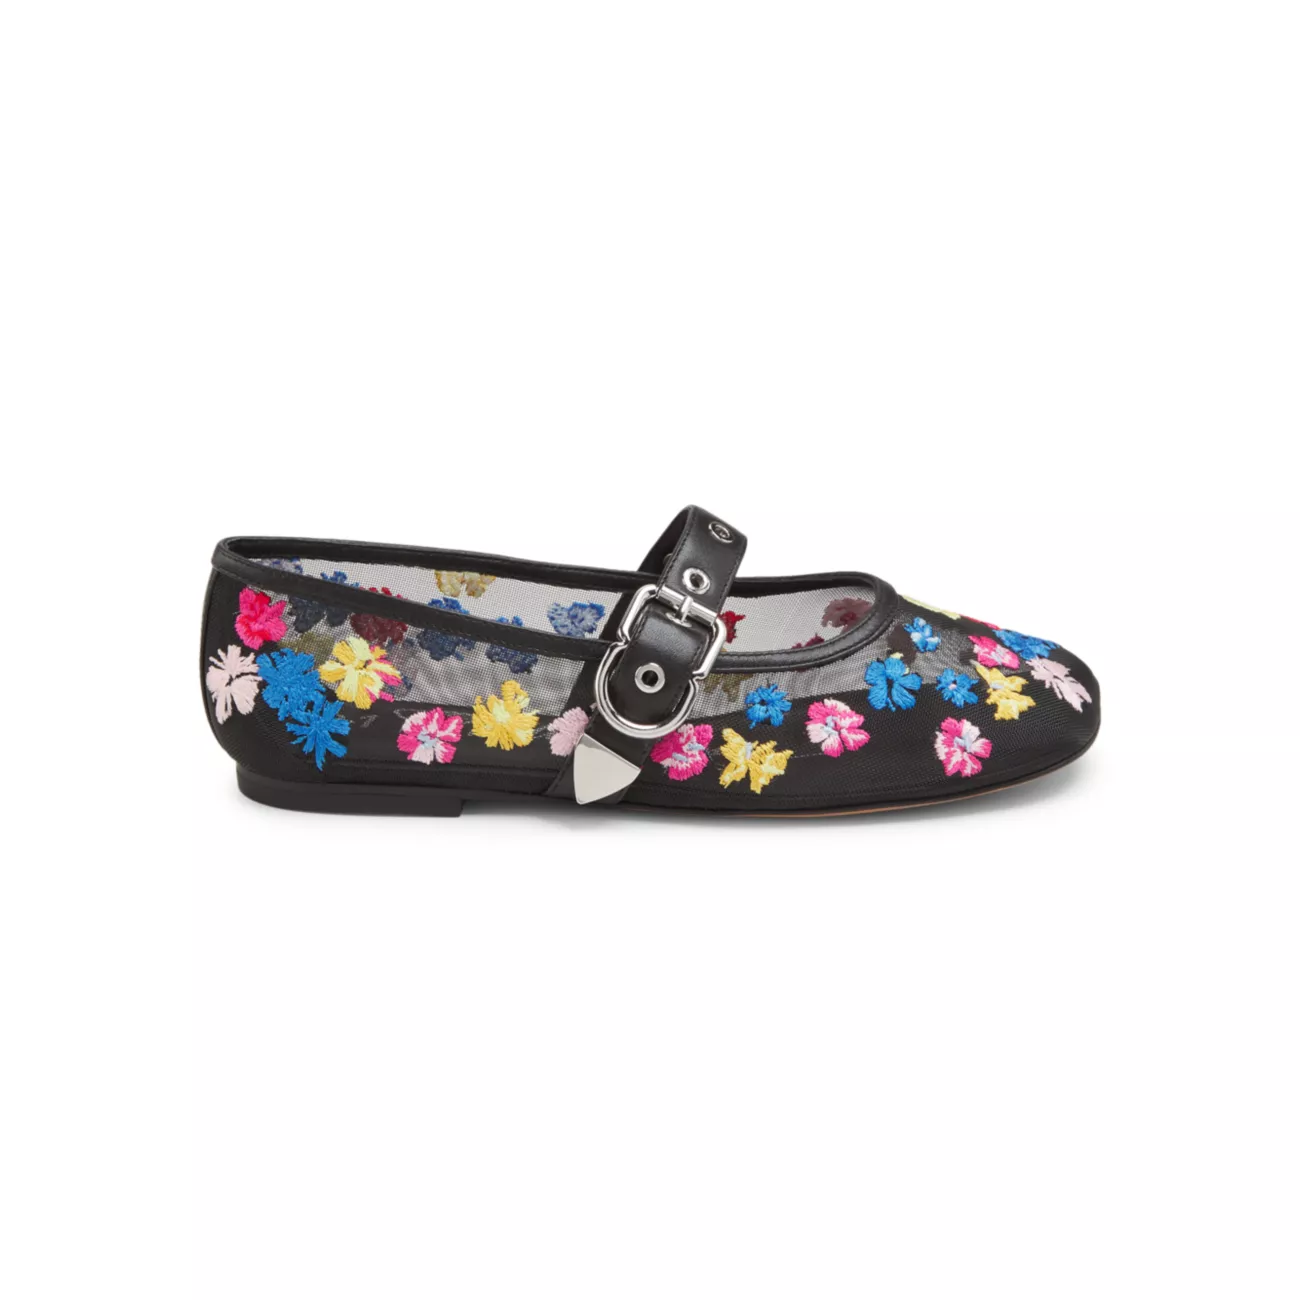 Flowerworks Floral-Embroidered Mesh Mary Jane Flats 3.1 PHILLIP LIM